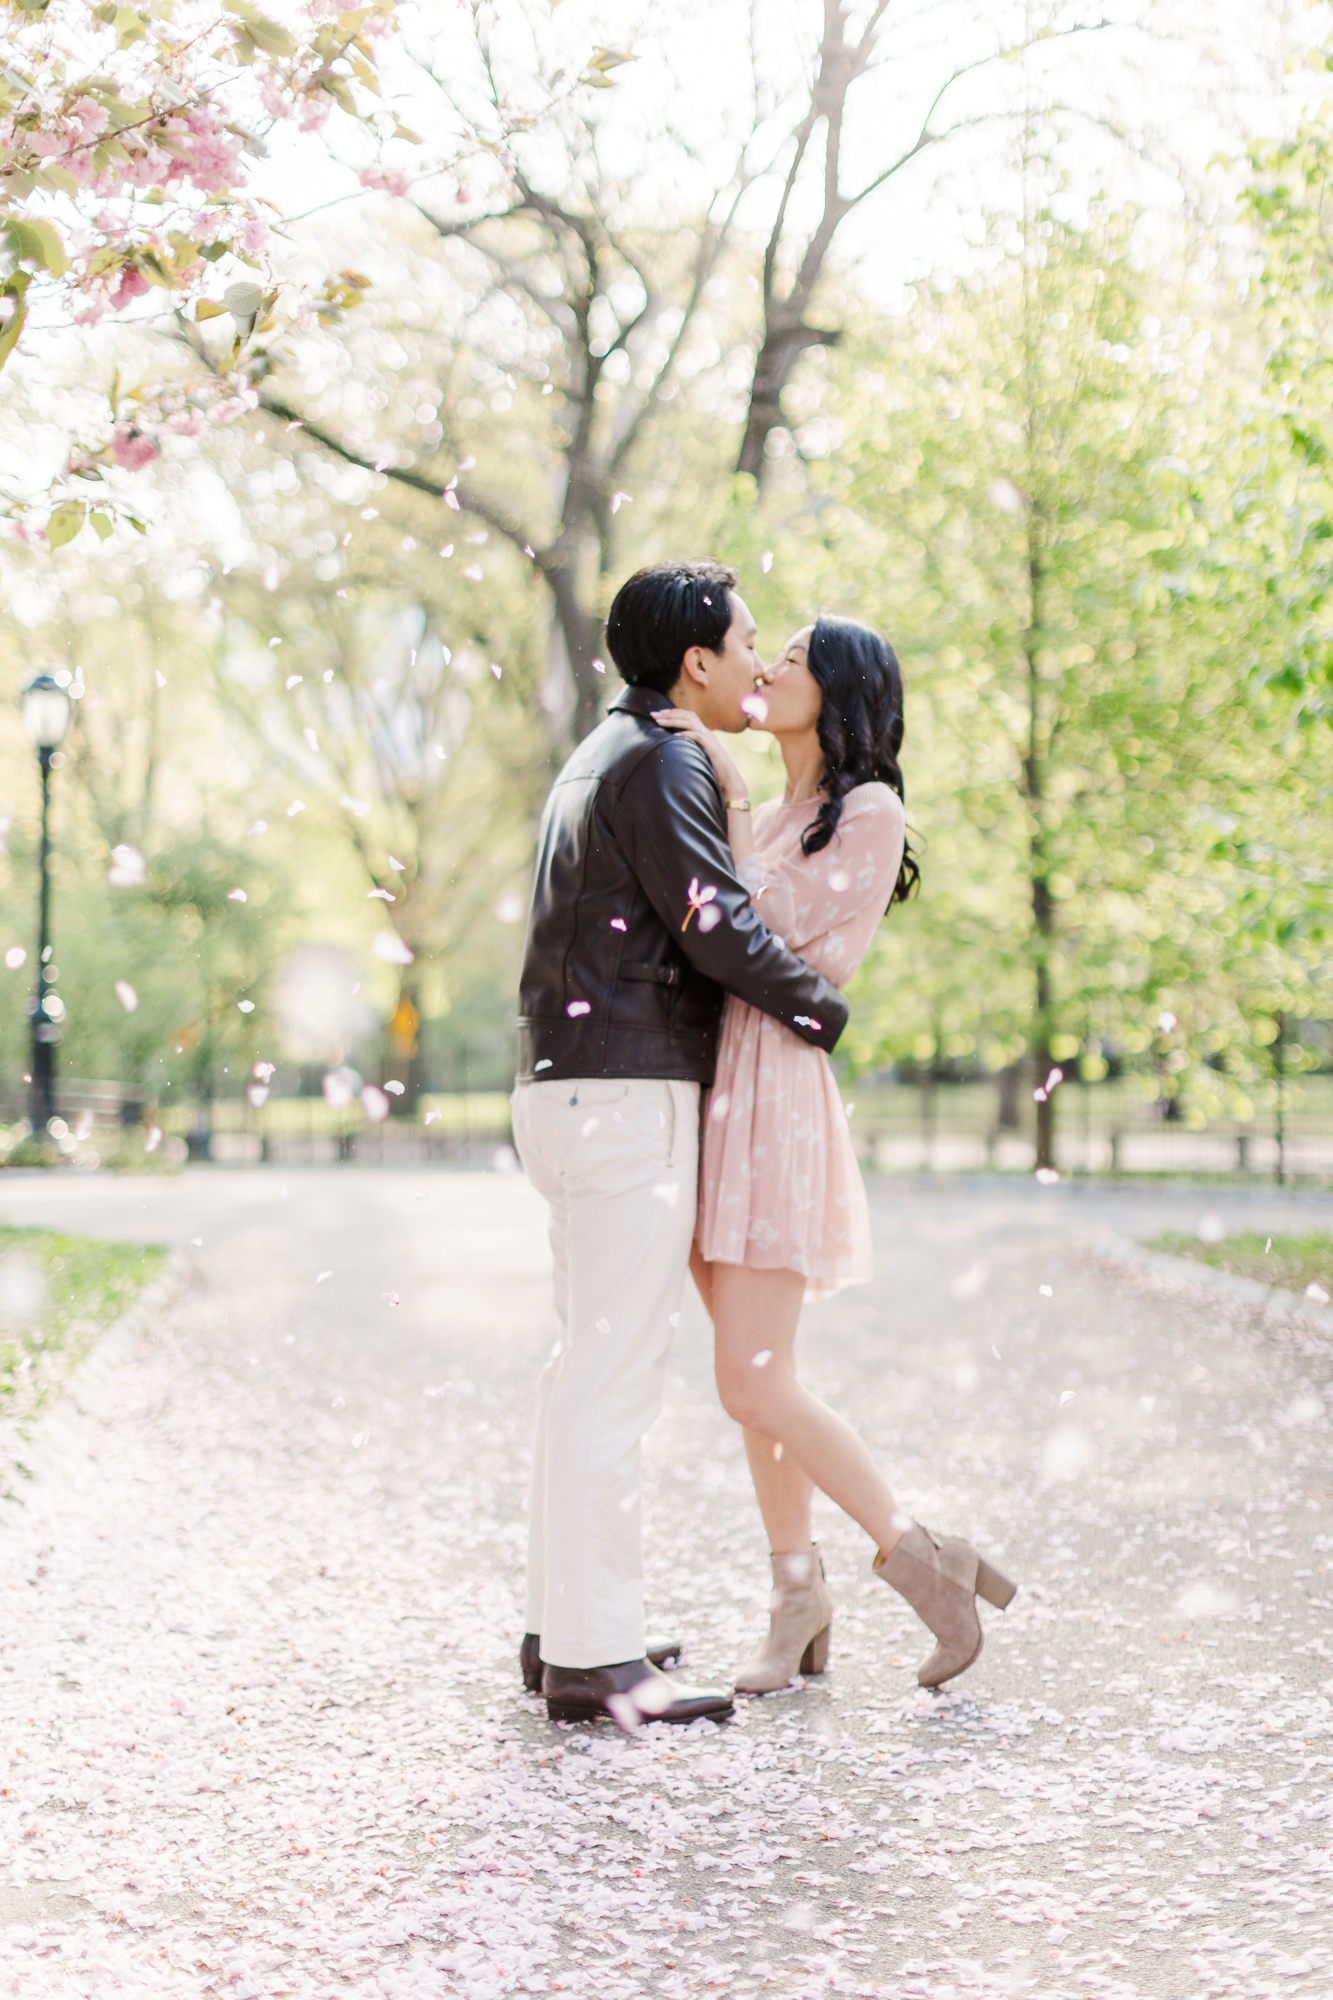 Amazing Engagement Photos With Cherry Blossoms in NYC